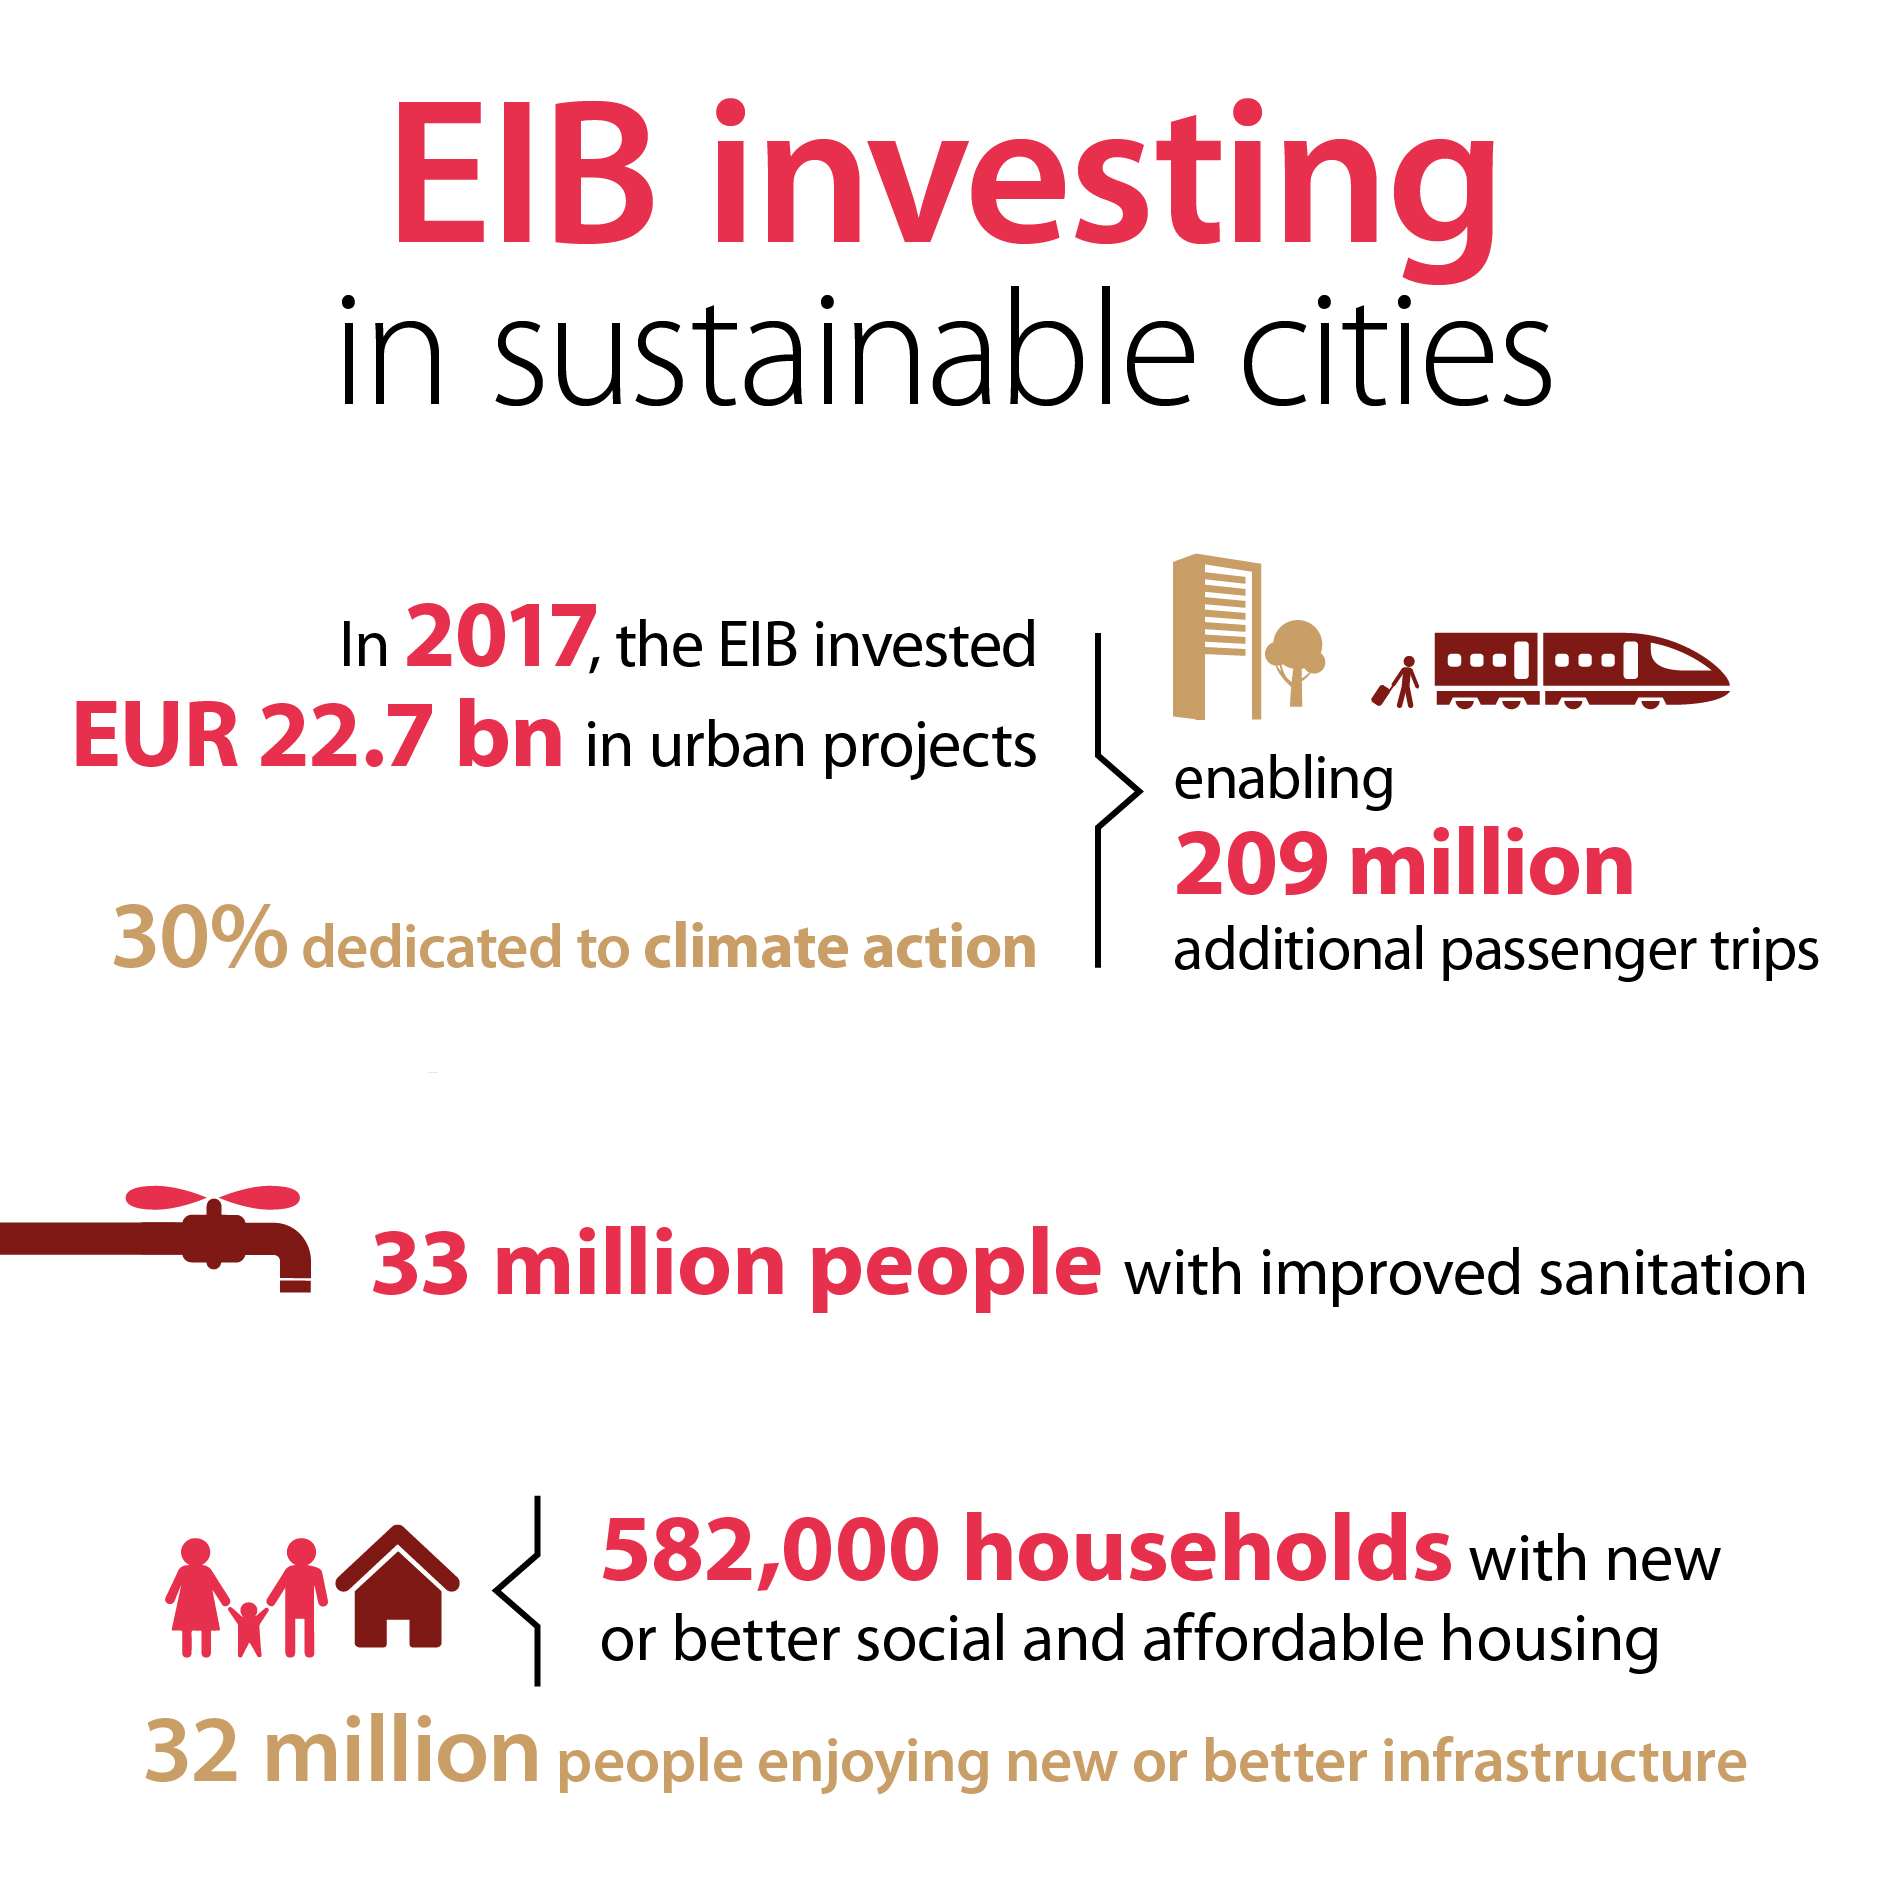 EIB investing in sustainable cities